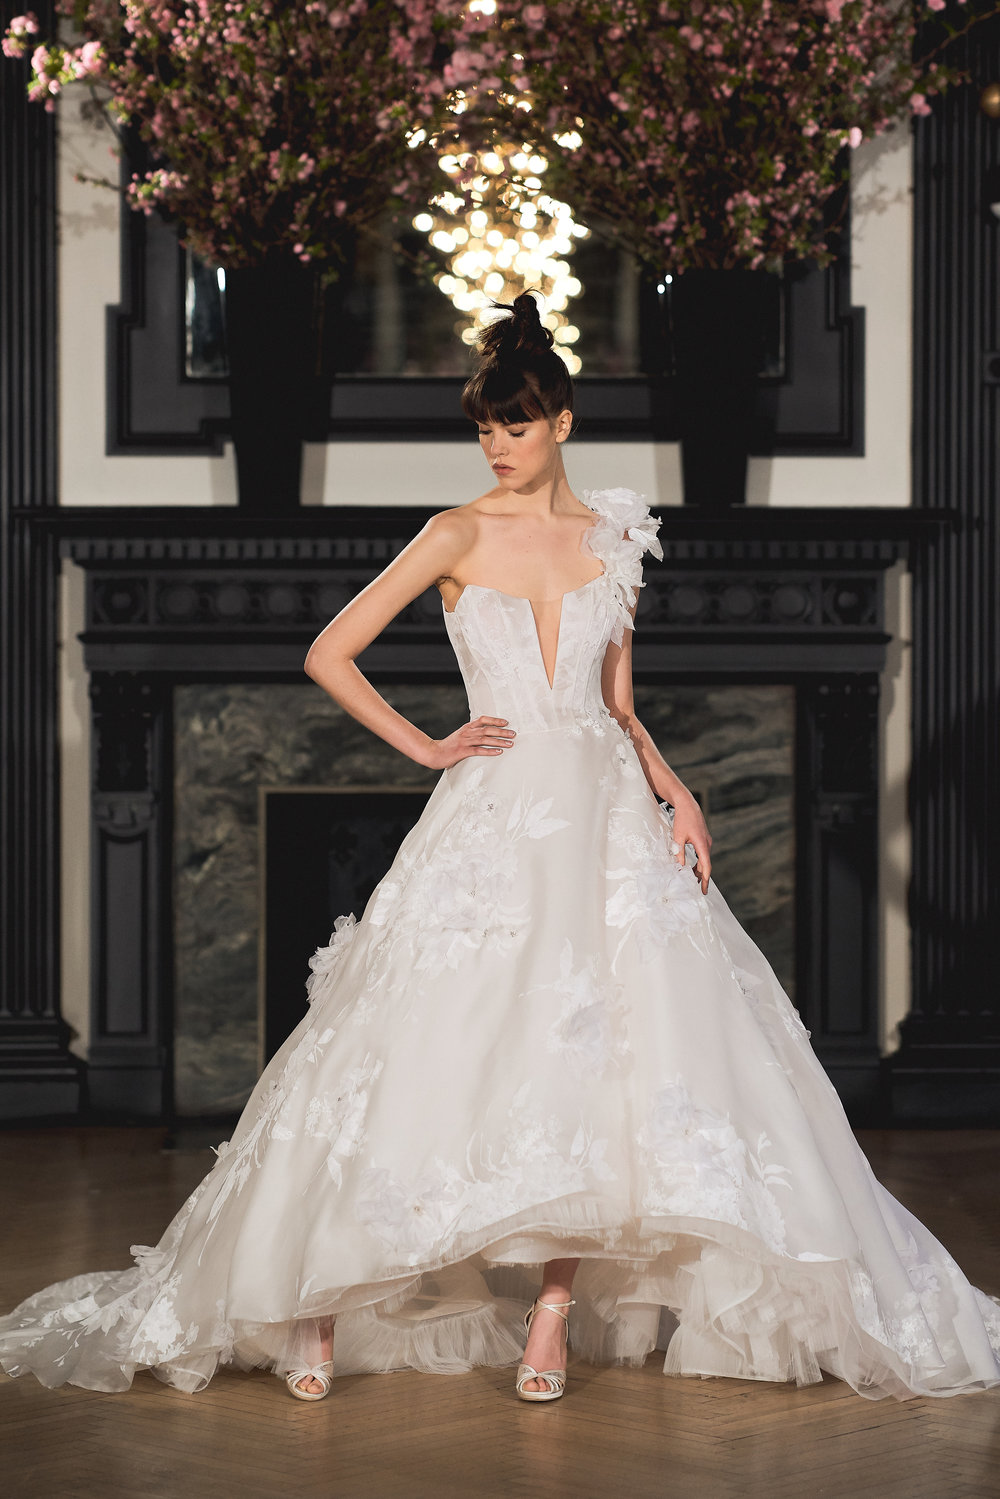 8 Canadian wedding dress designers you should know about